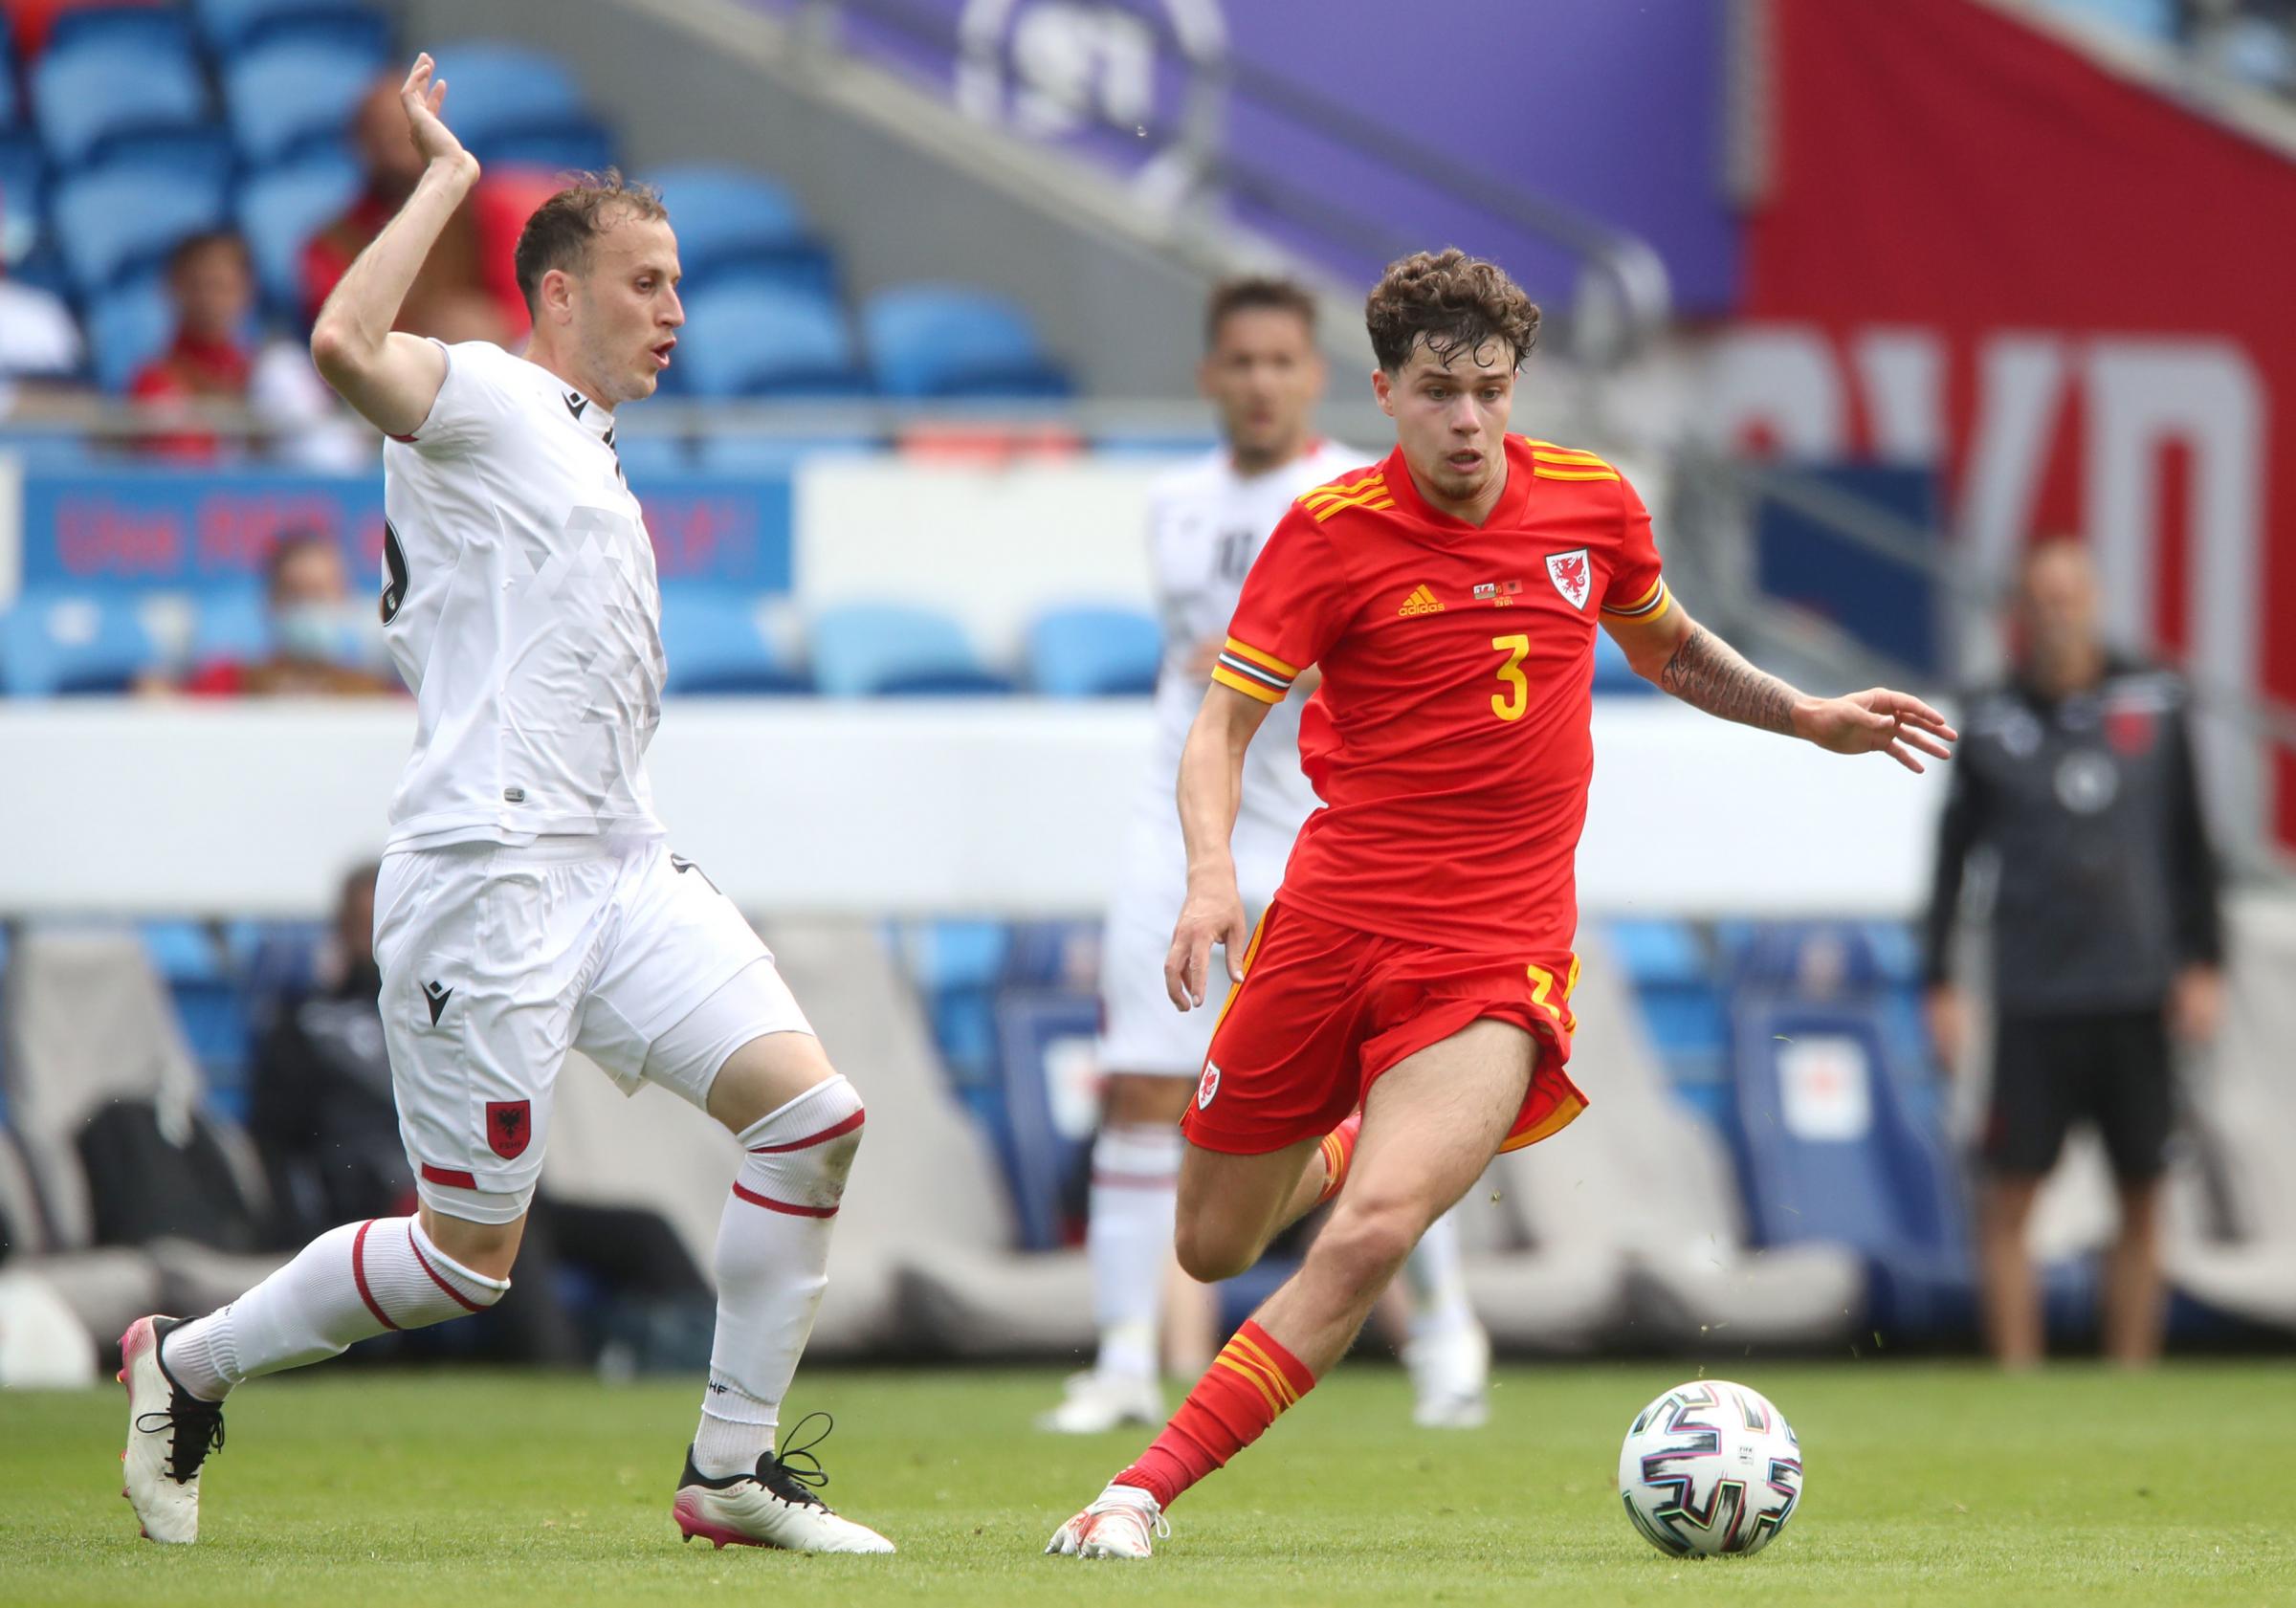 Wales Neco Williams (right) and Albanias Ardian Ismajli battle for the ball during the international friendly match at Cardiff City Stadium, Wales. Picture date: Saturday June 5, 2021. PA Photo. See PA story SOCCER Wales. Photo credit should read: